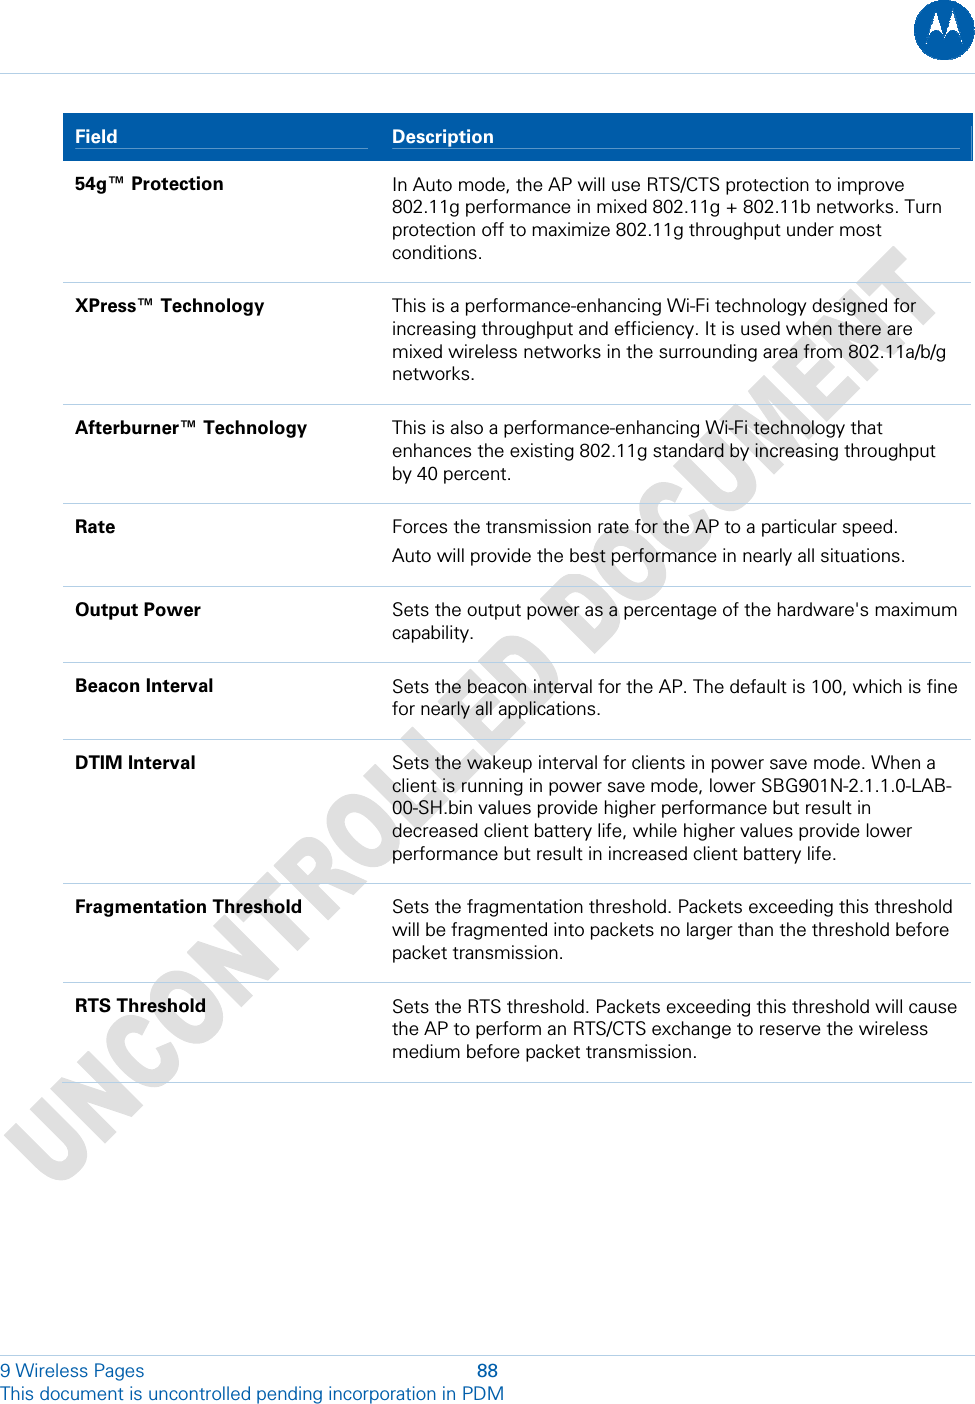  9 Wireless Pages  88 This document is uncontrolled pending incorporation in PDM  Field   Description 54g™ Protection  In Auto mode, the AP will use RTS/CTS protection to improve 802.11g performance in mixed 802.11g + 802.11b networks. Turn protection off to maximize 802.11g throughput under most conditions. XPress™ Technology  This is a performance-enhancing Wi-Fi technology designed for increasing throughput and efficiency. It is used when there are mixed wireless networks in the surrounding area from 802.11a/b/g networks. Afterburner™ Technology  This is also a performance-enhancing Wi-Fi technology that enhances the existing 802.11g standard by increasing throughput by 40 percent. Rate  Forces the transmission rate for the AP to a particular speed. Auto will provide the best performance in nearly all situations. Output Power  Sets the output power as a percentage of the hardware&apos;s maximum capability. Beacon Interval  Sets the beacon interval for the AP. The default is 100, which is fine for nearly all applications. DTIM Interval  Sets the wakeup interval for clients in power save mode. When a client is running in power save mode, lower SBG901N-2.1.1.0-LAB-00-SH.bin values provide higher performance but result in decreased client battery life, while higher values provide lower performance but result in increased client battery life. Fragmentation Threshold  Sets the fragmentation threshold. Packets exceeding this threshold will be fragmented into packets no larger than the threshold before packet transmission. RTS Threshold  Sets the RTS threshold. Packets exceeding this threshold will cause the AP to perform an RTS/CTS exchange to reserve the wireless medium before packet transmission. 